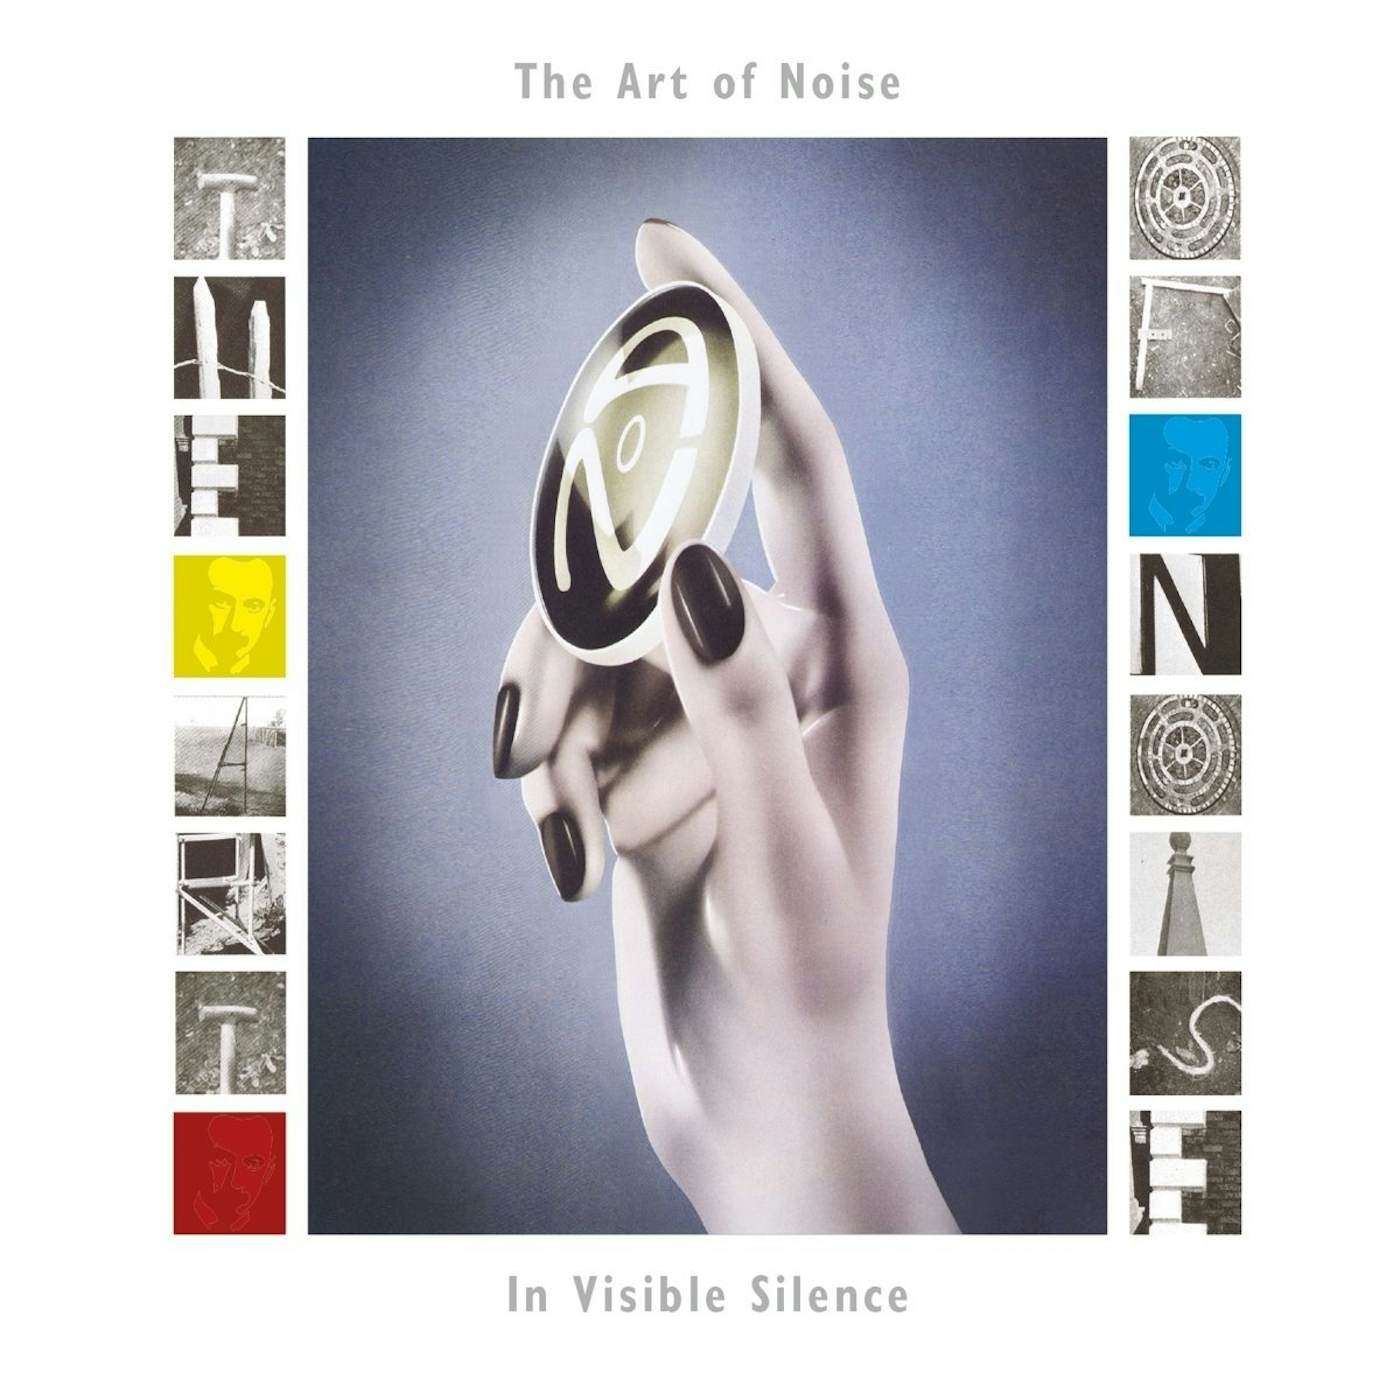 The Art Of Noise IN VISIBLE SILENCE: DELUXE EDITION CD